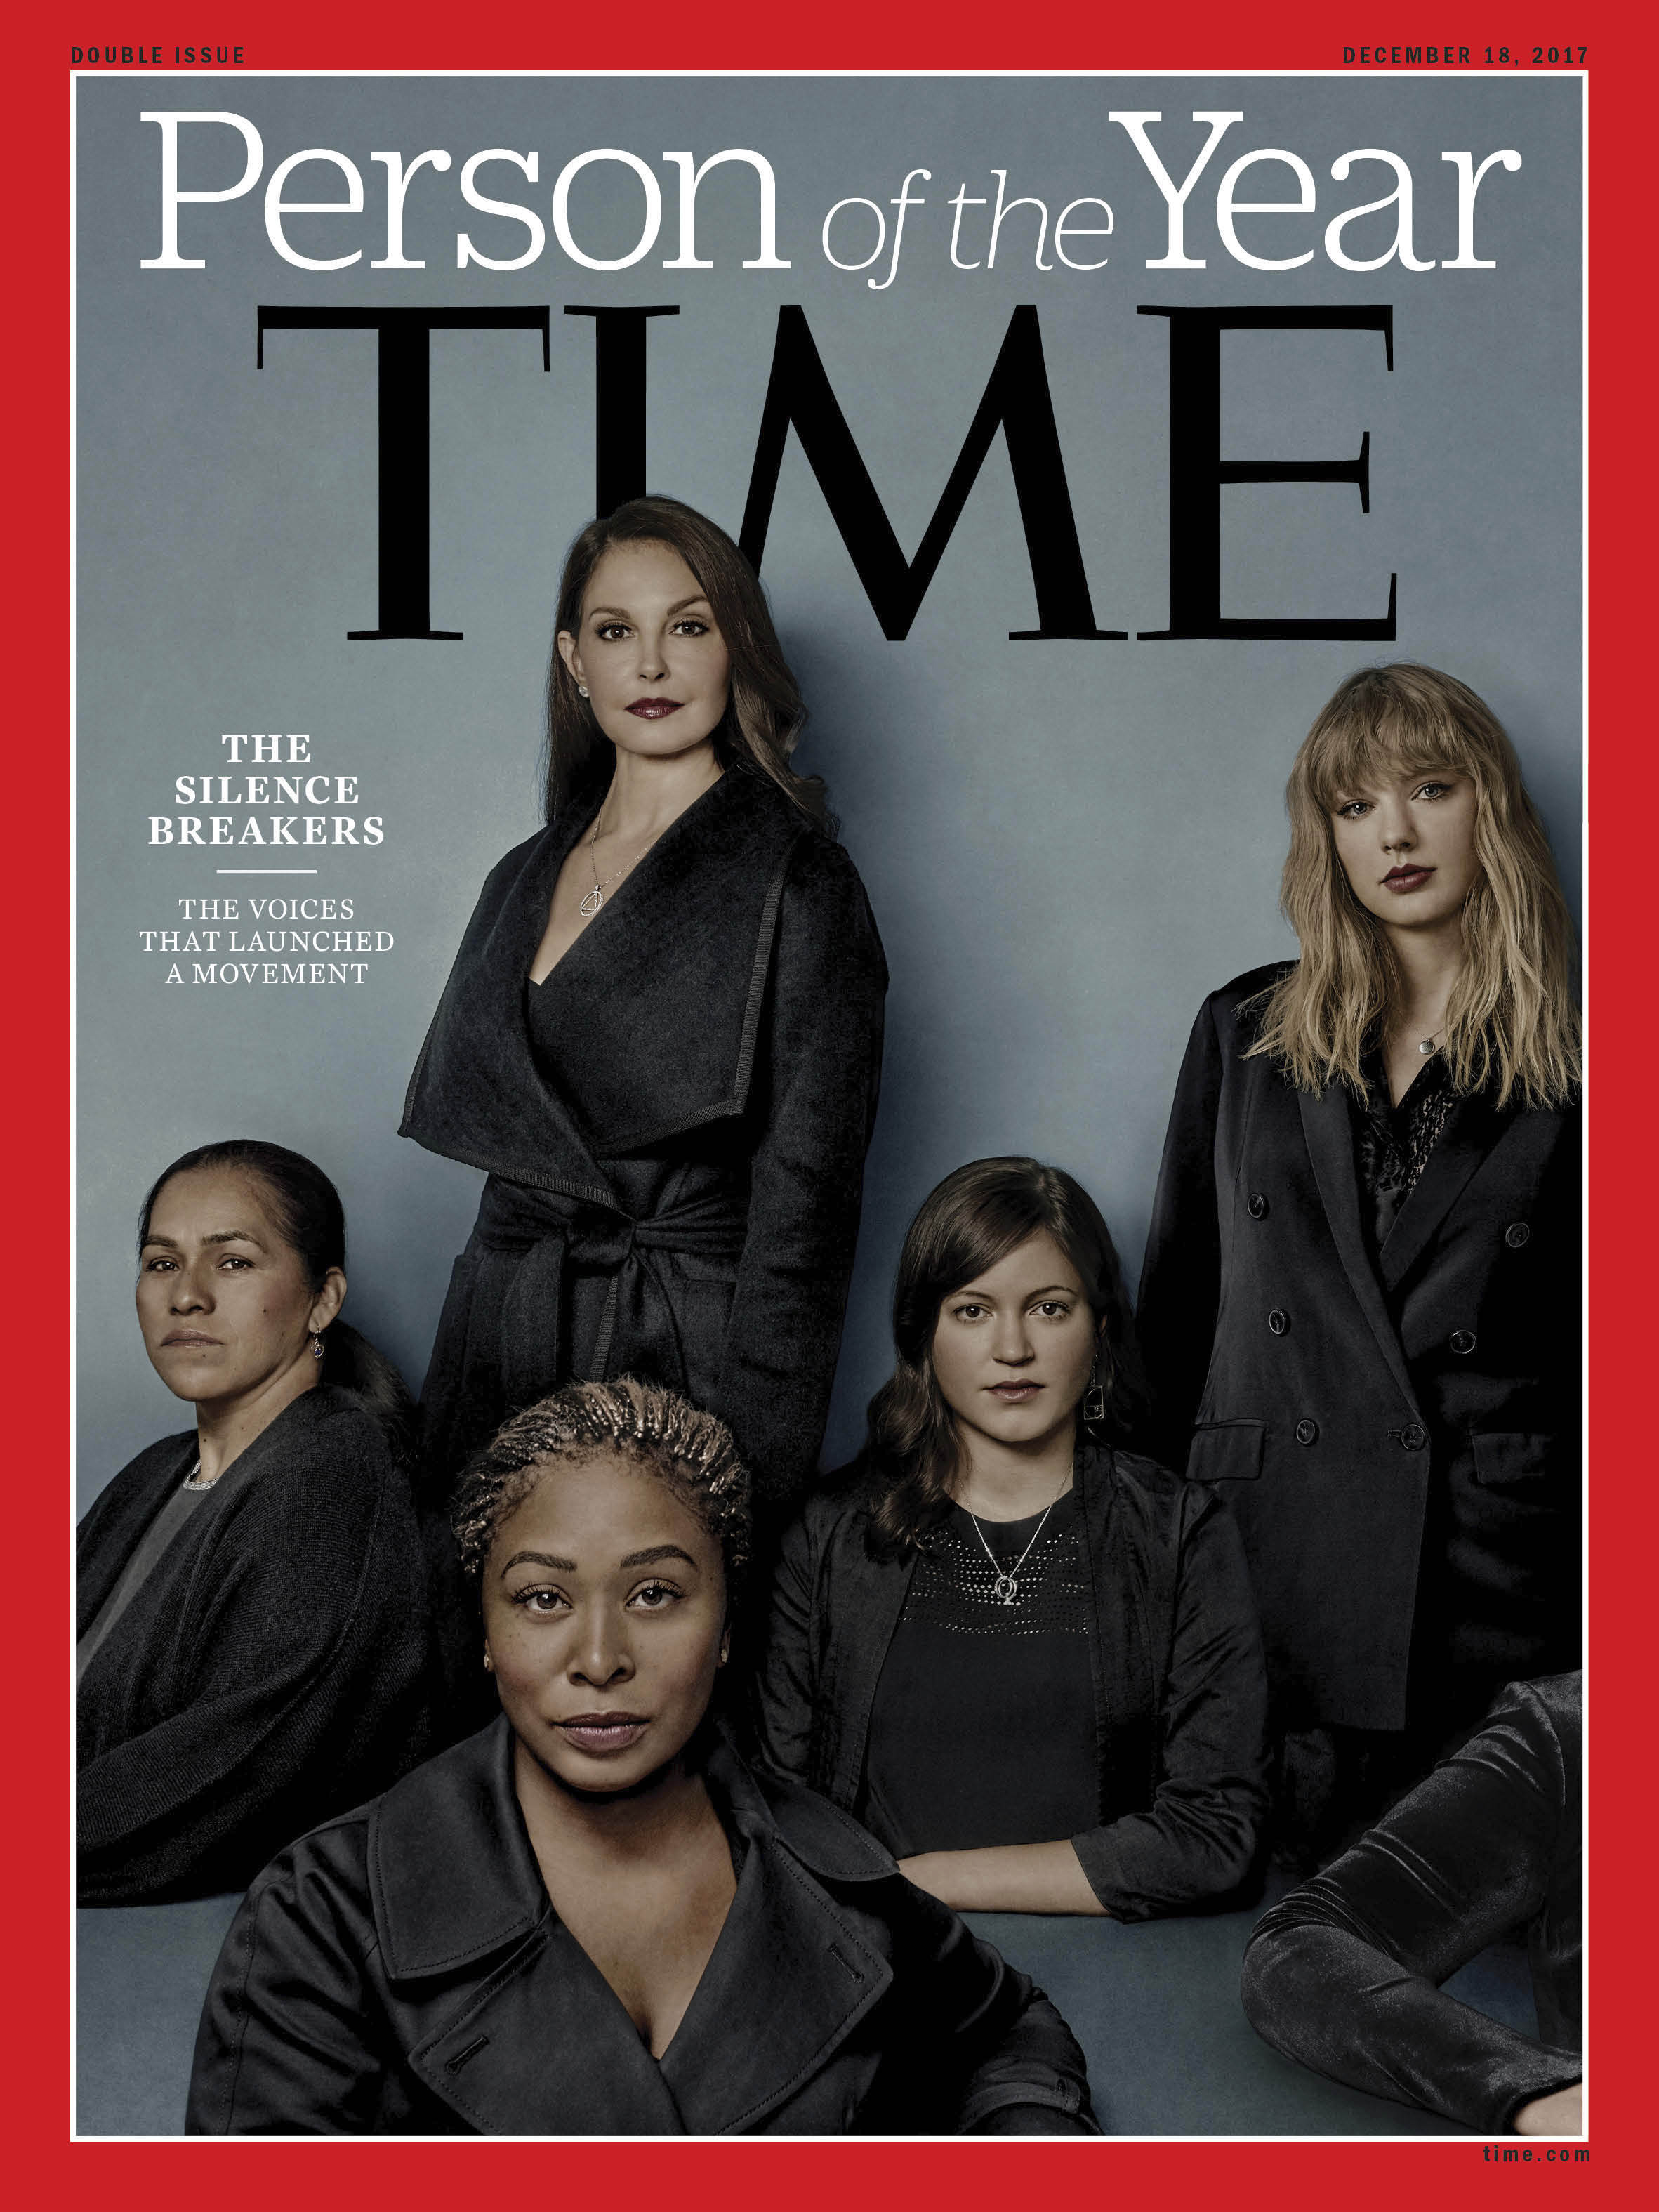 The Time magazine named the 'Silence Breakers', those who have shared their stories about sexual assault and harassment,                         'person of the year'. The magazine's cover features Isabel Pascual, Ashley Judd, Taylor Swift, Adama Iwu and Susan Fowler [AP]